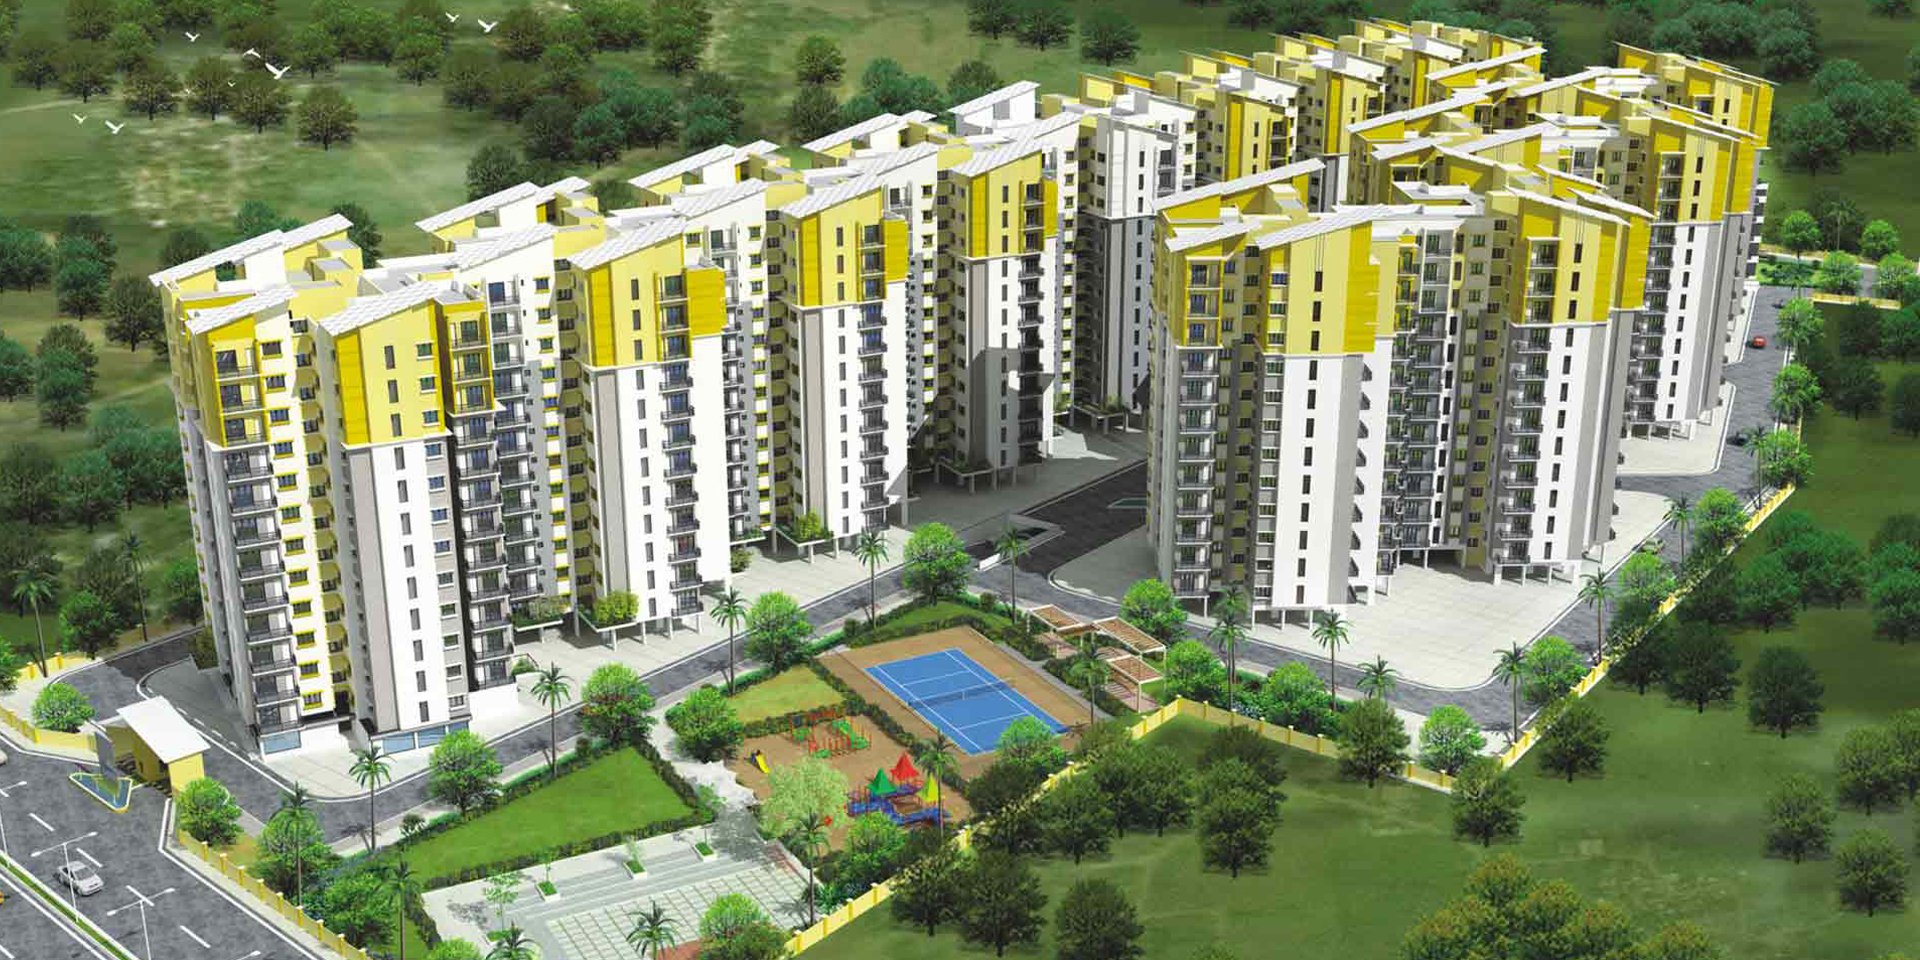 Simple Apartments For Sale In Siruseri for Small Space